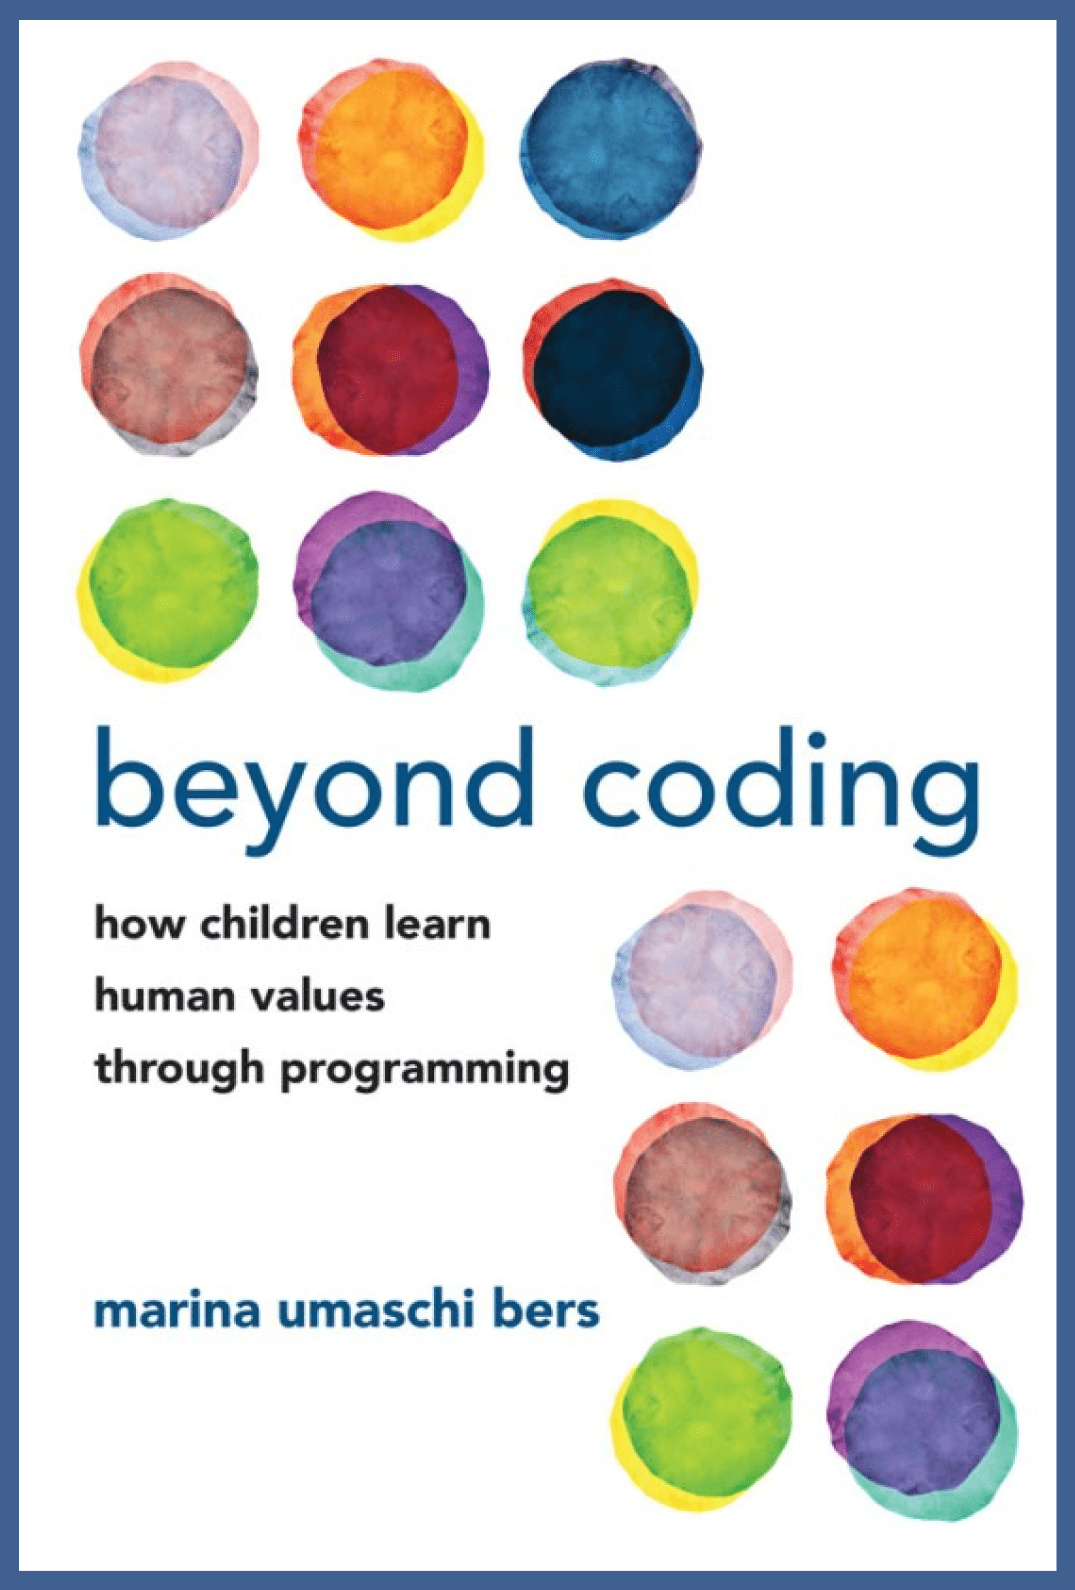 Cover of the book Beyond Coding.